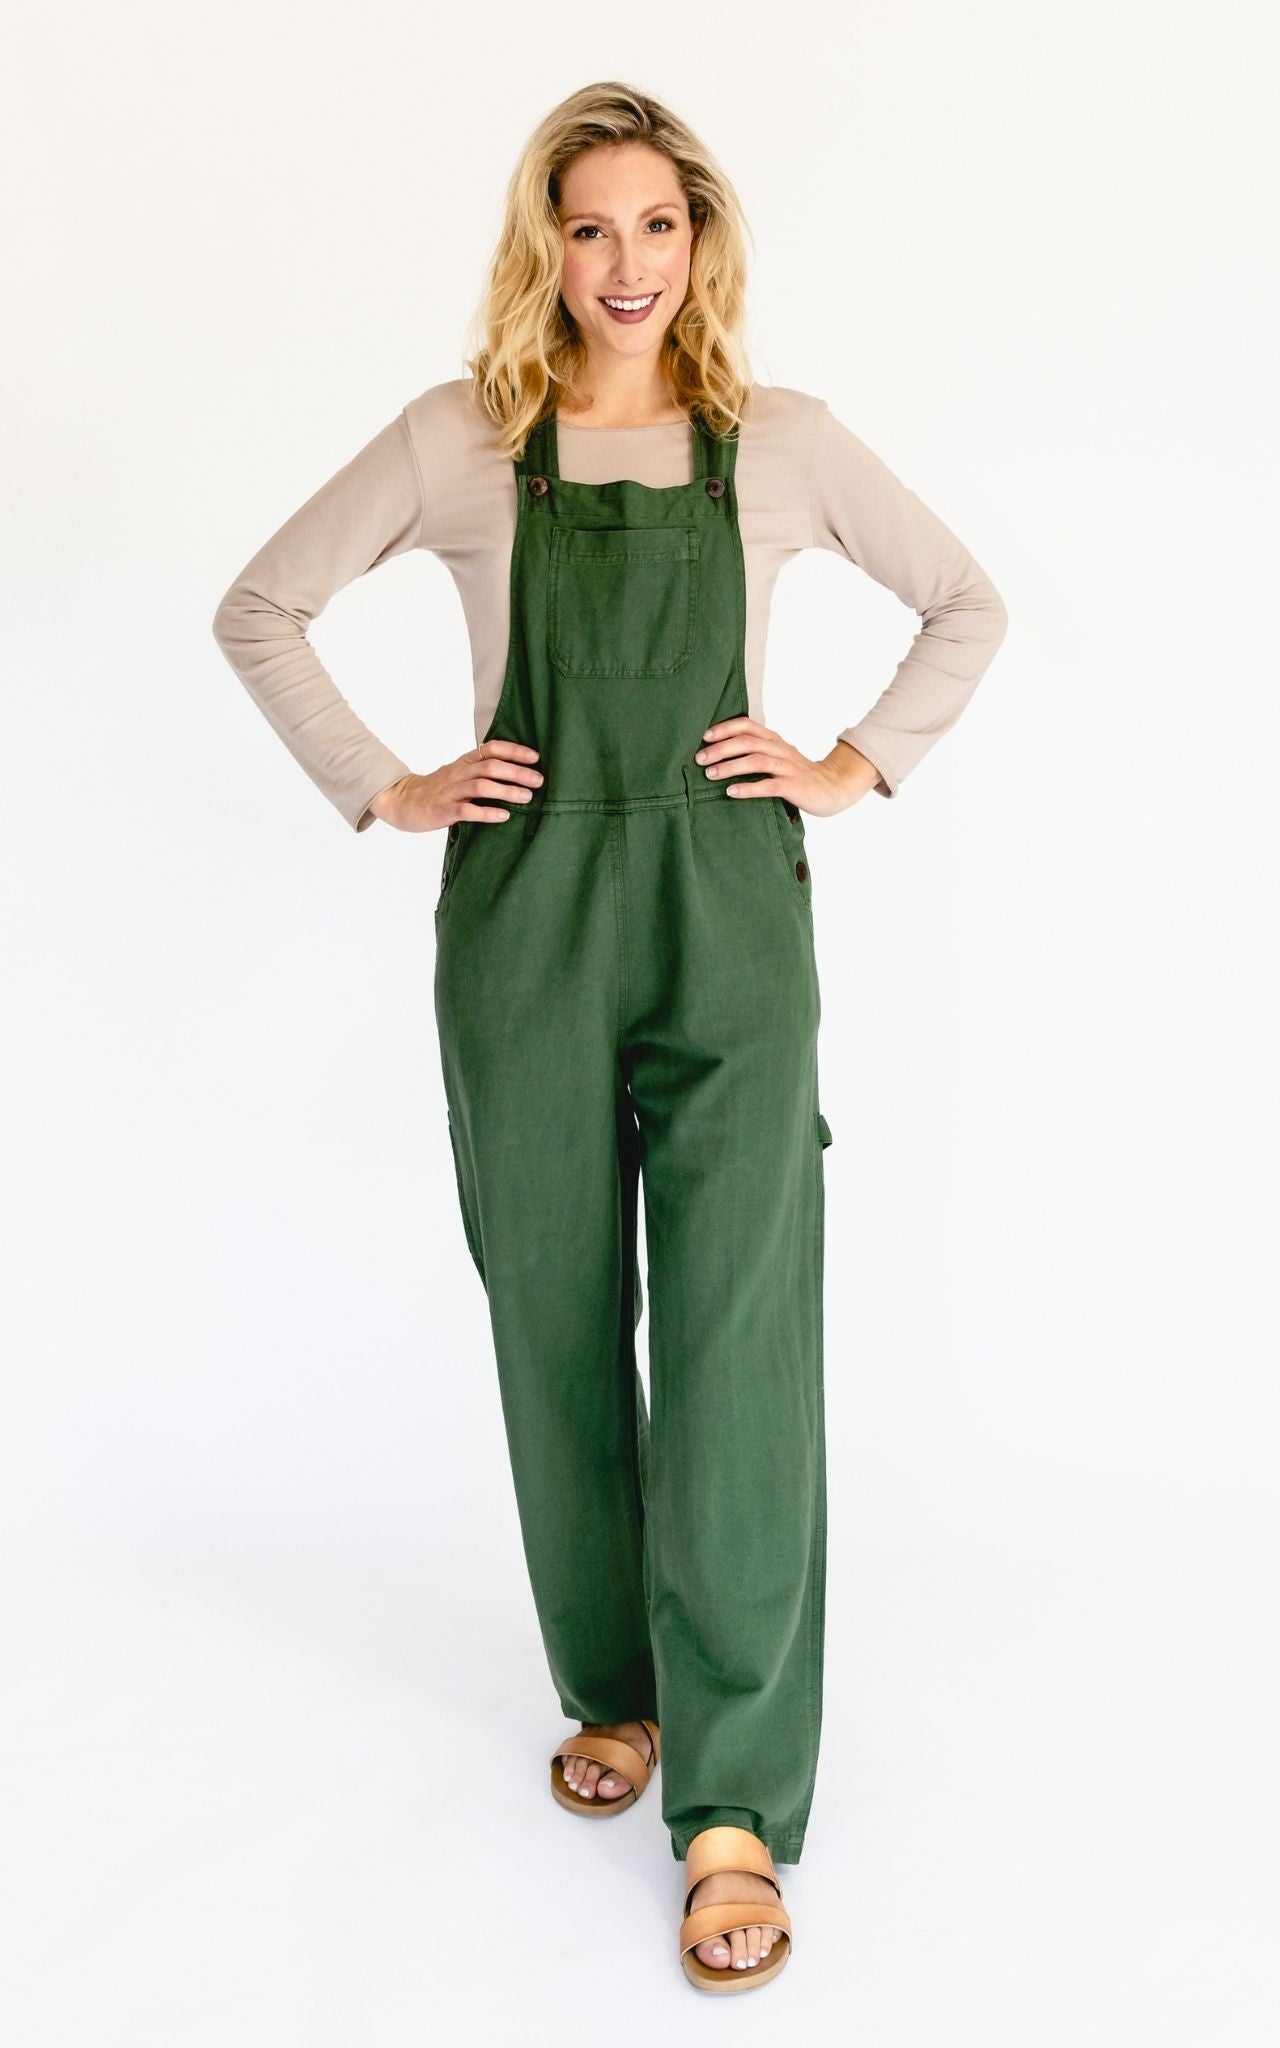 Surya Australia Ethical Classic Cotton Work Overalls from Nepal - Green